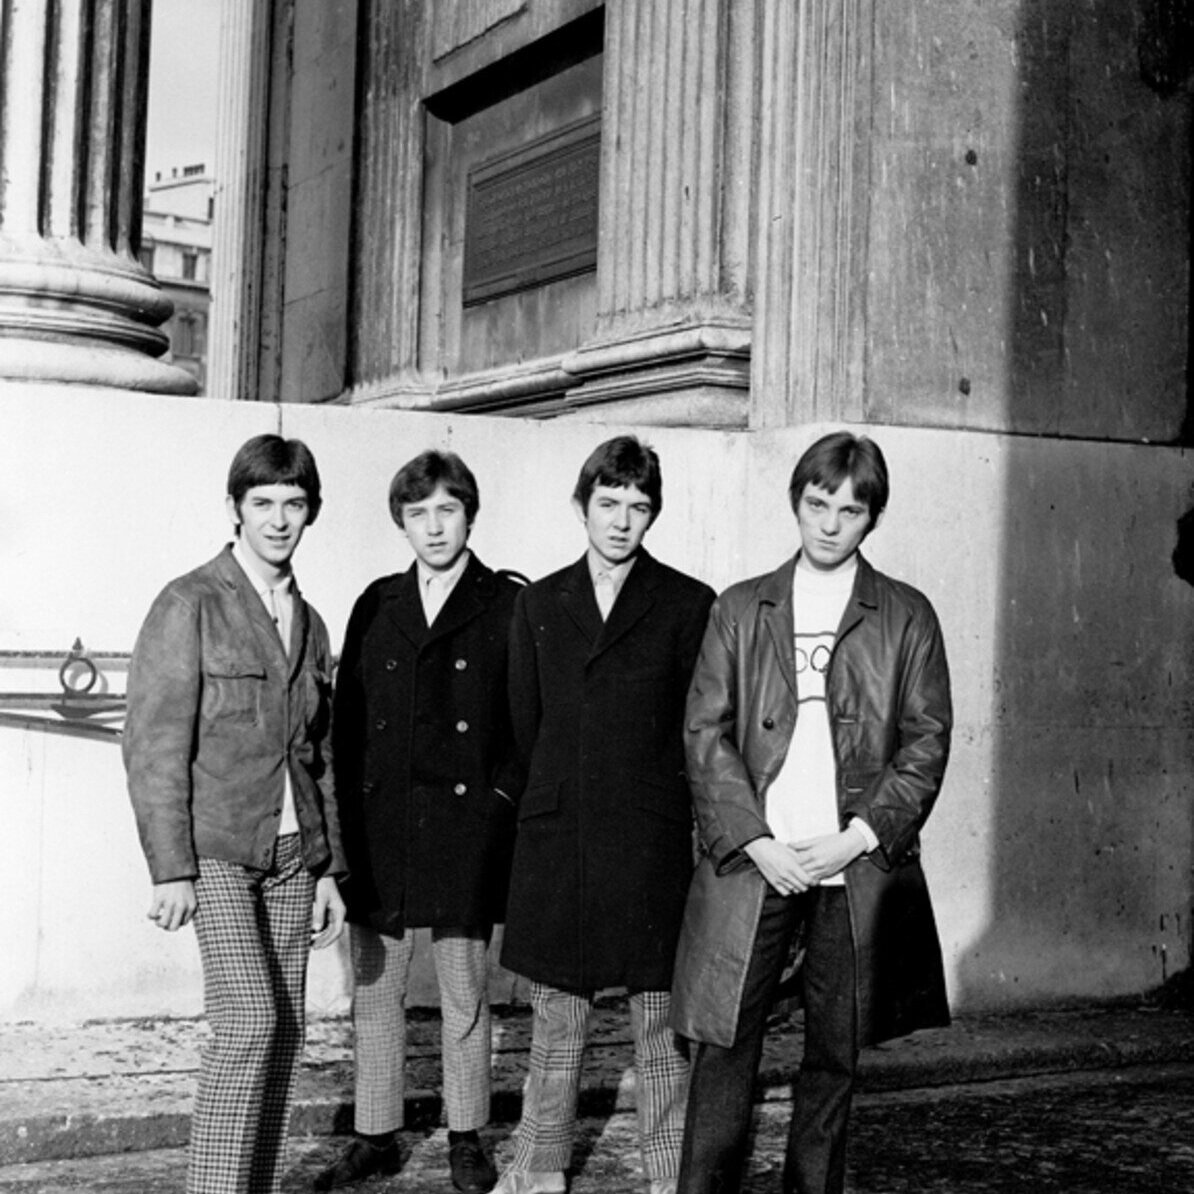 SMALL FACES